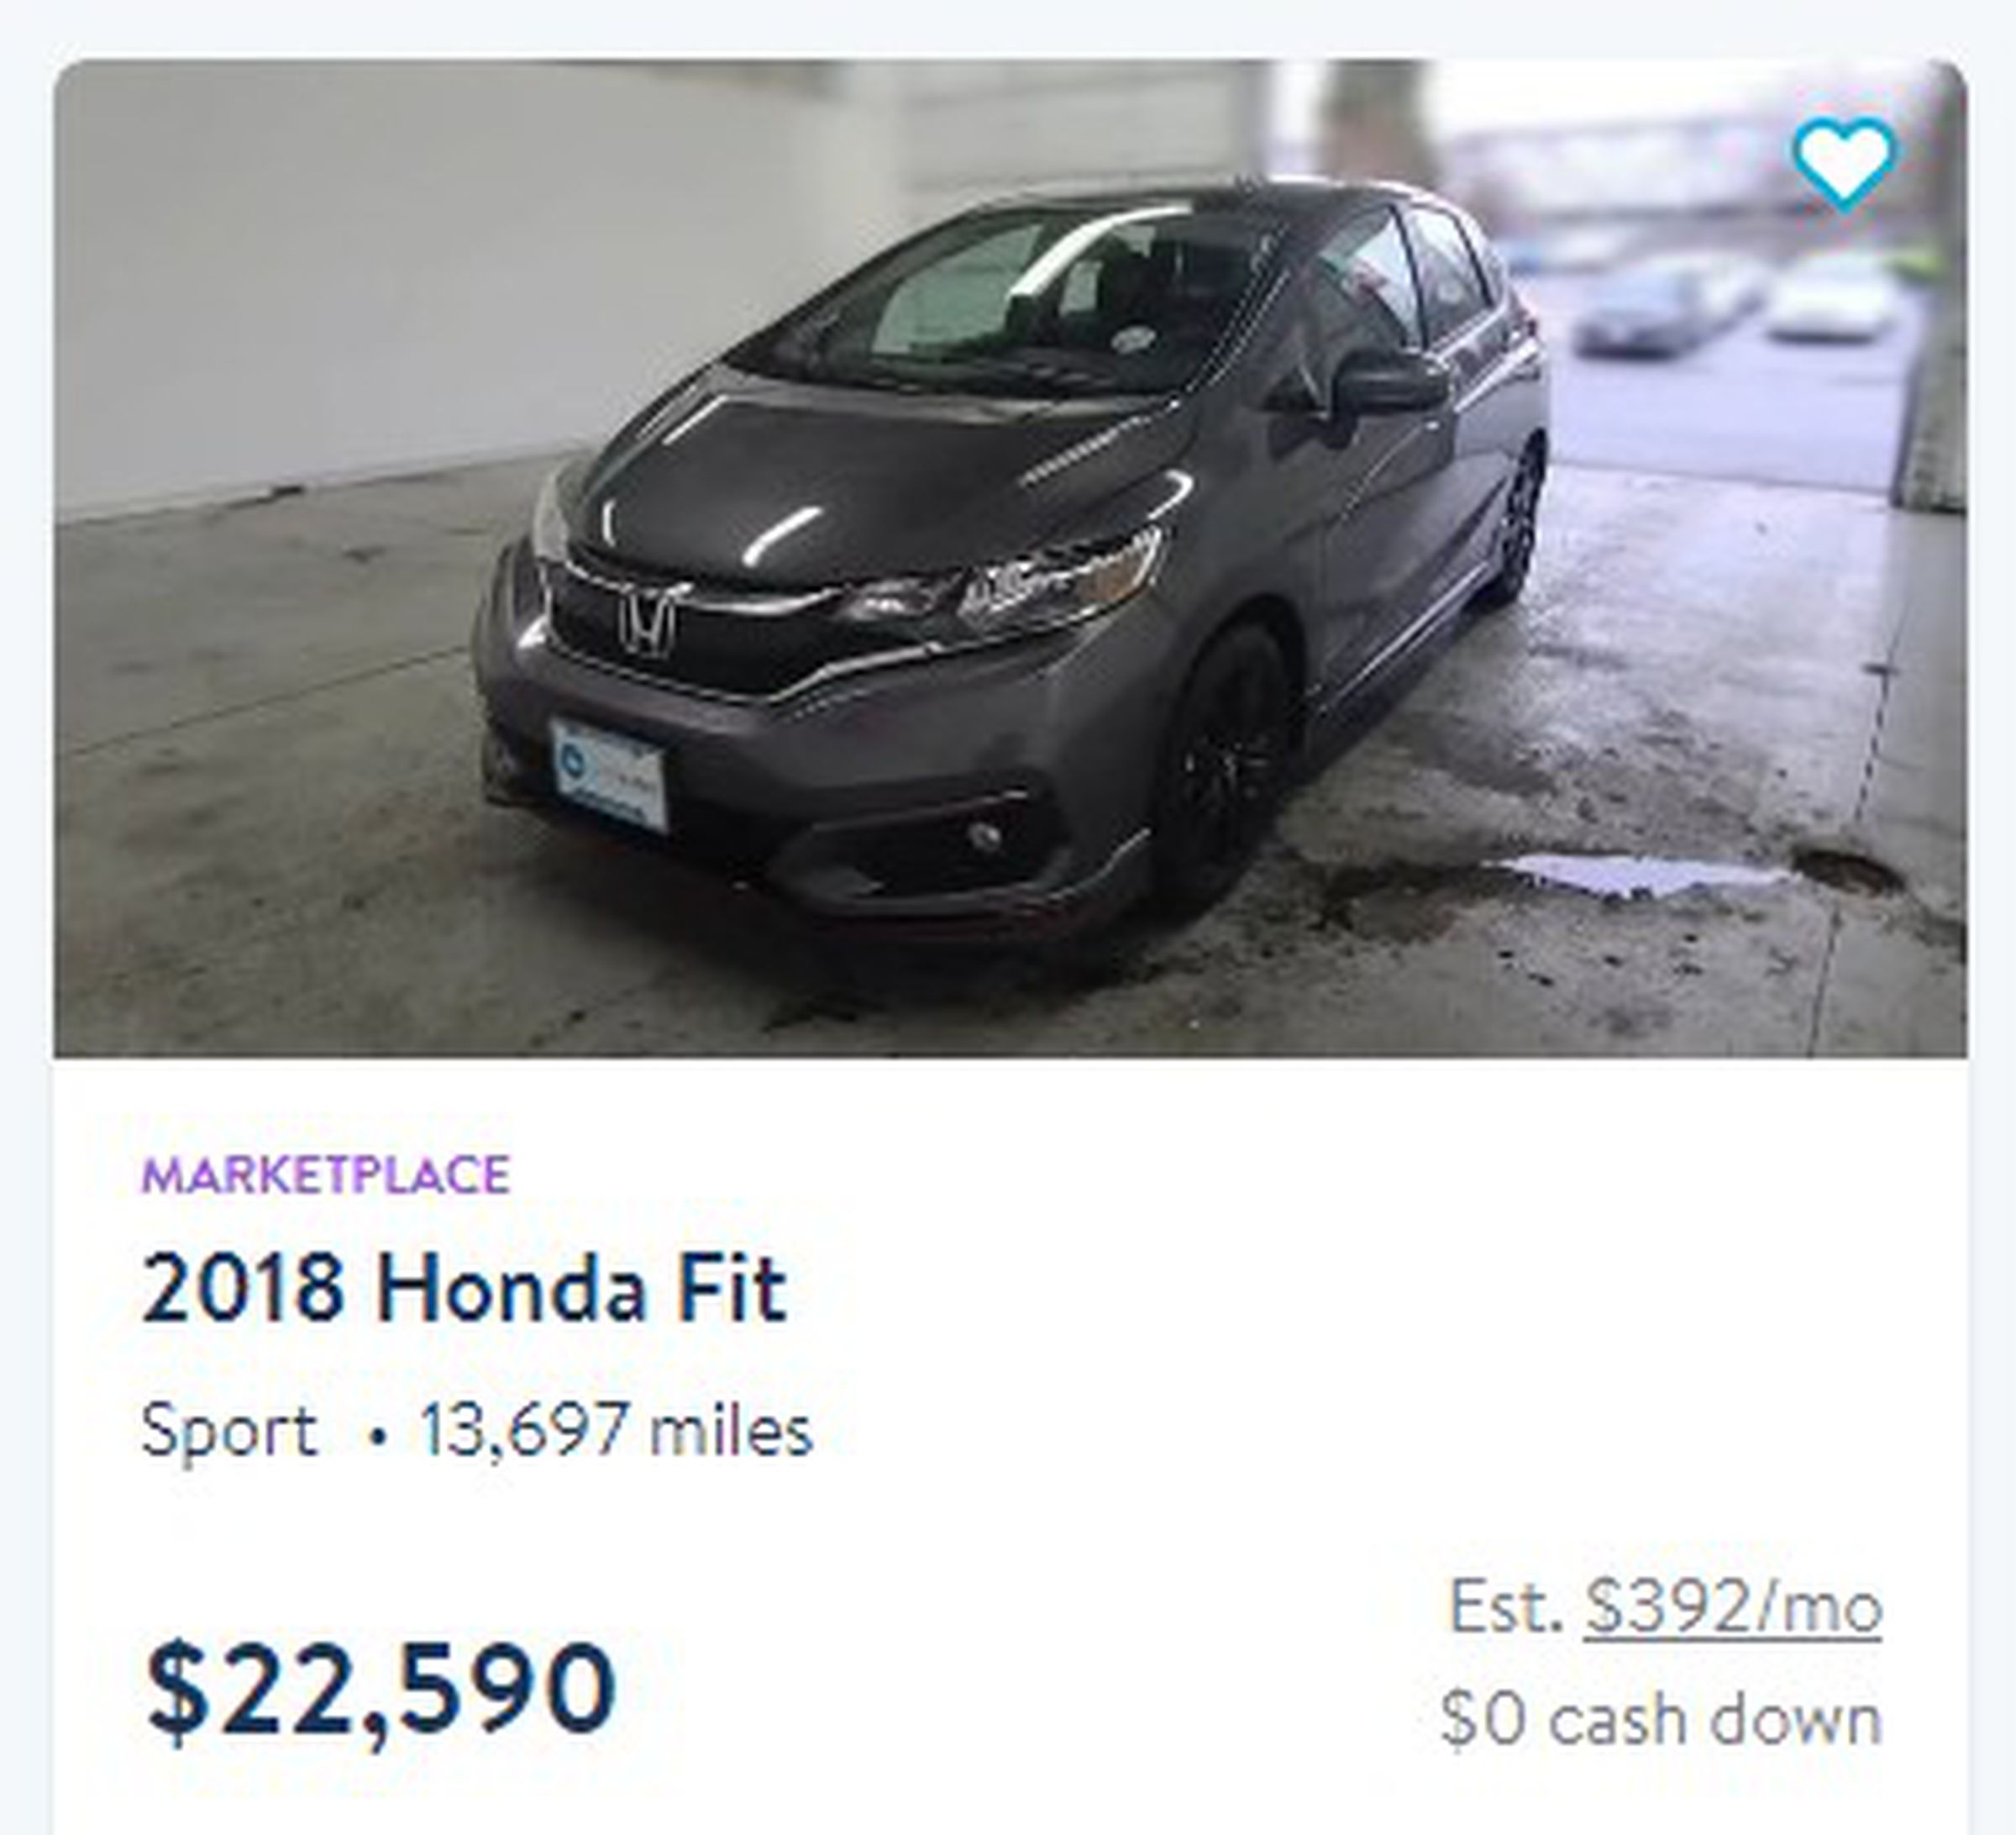 A 2018 Honda Fit with just 13,697 miles was recently sold for $22,590.